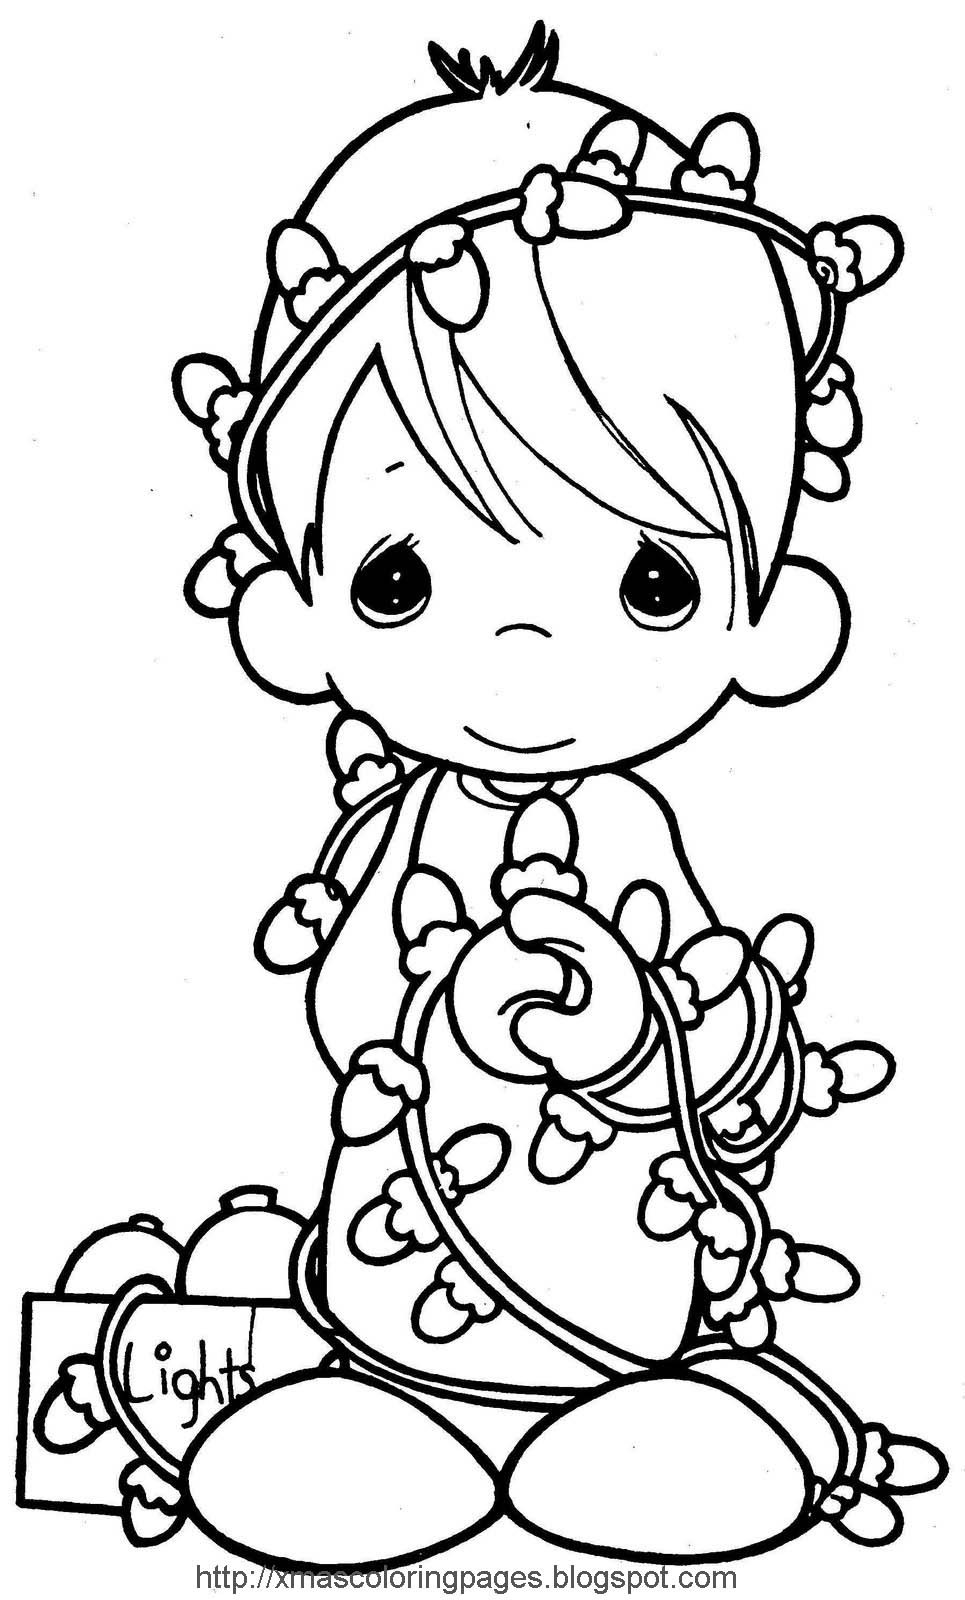 Kids Christmas Coloring Pages Printable
 XMAS COLORING PAGES